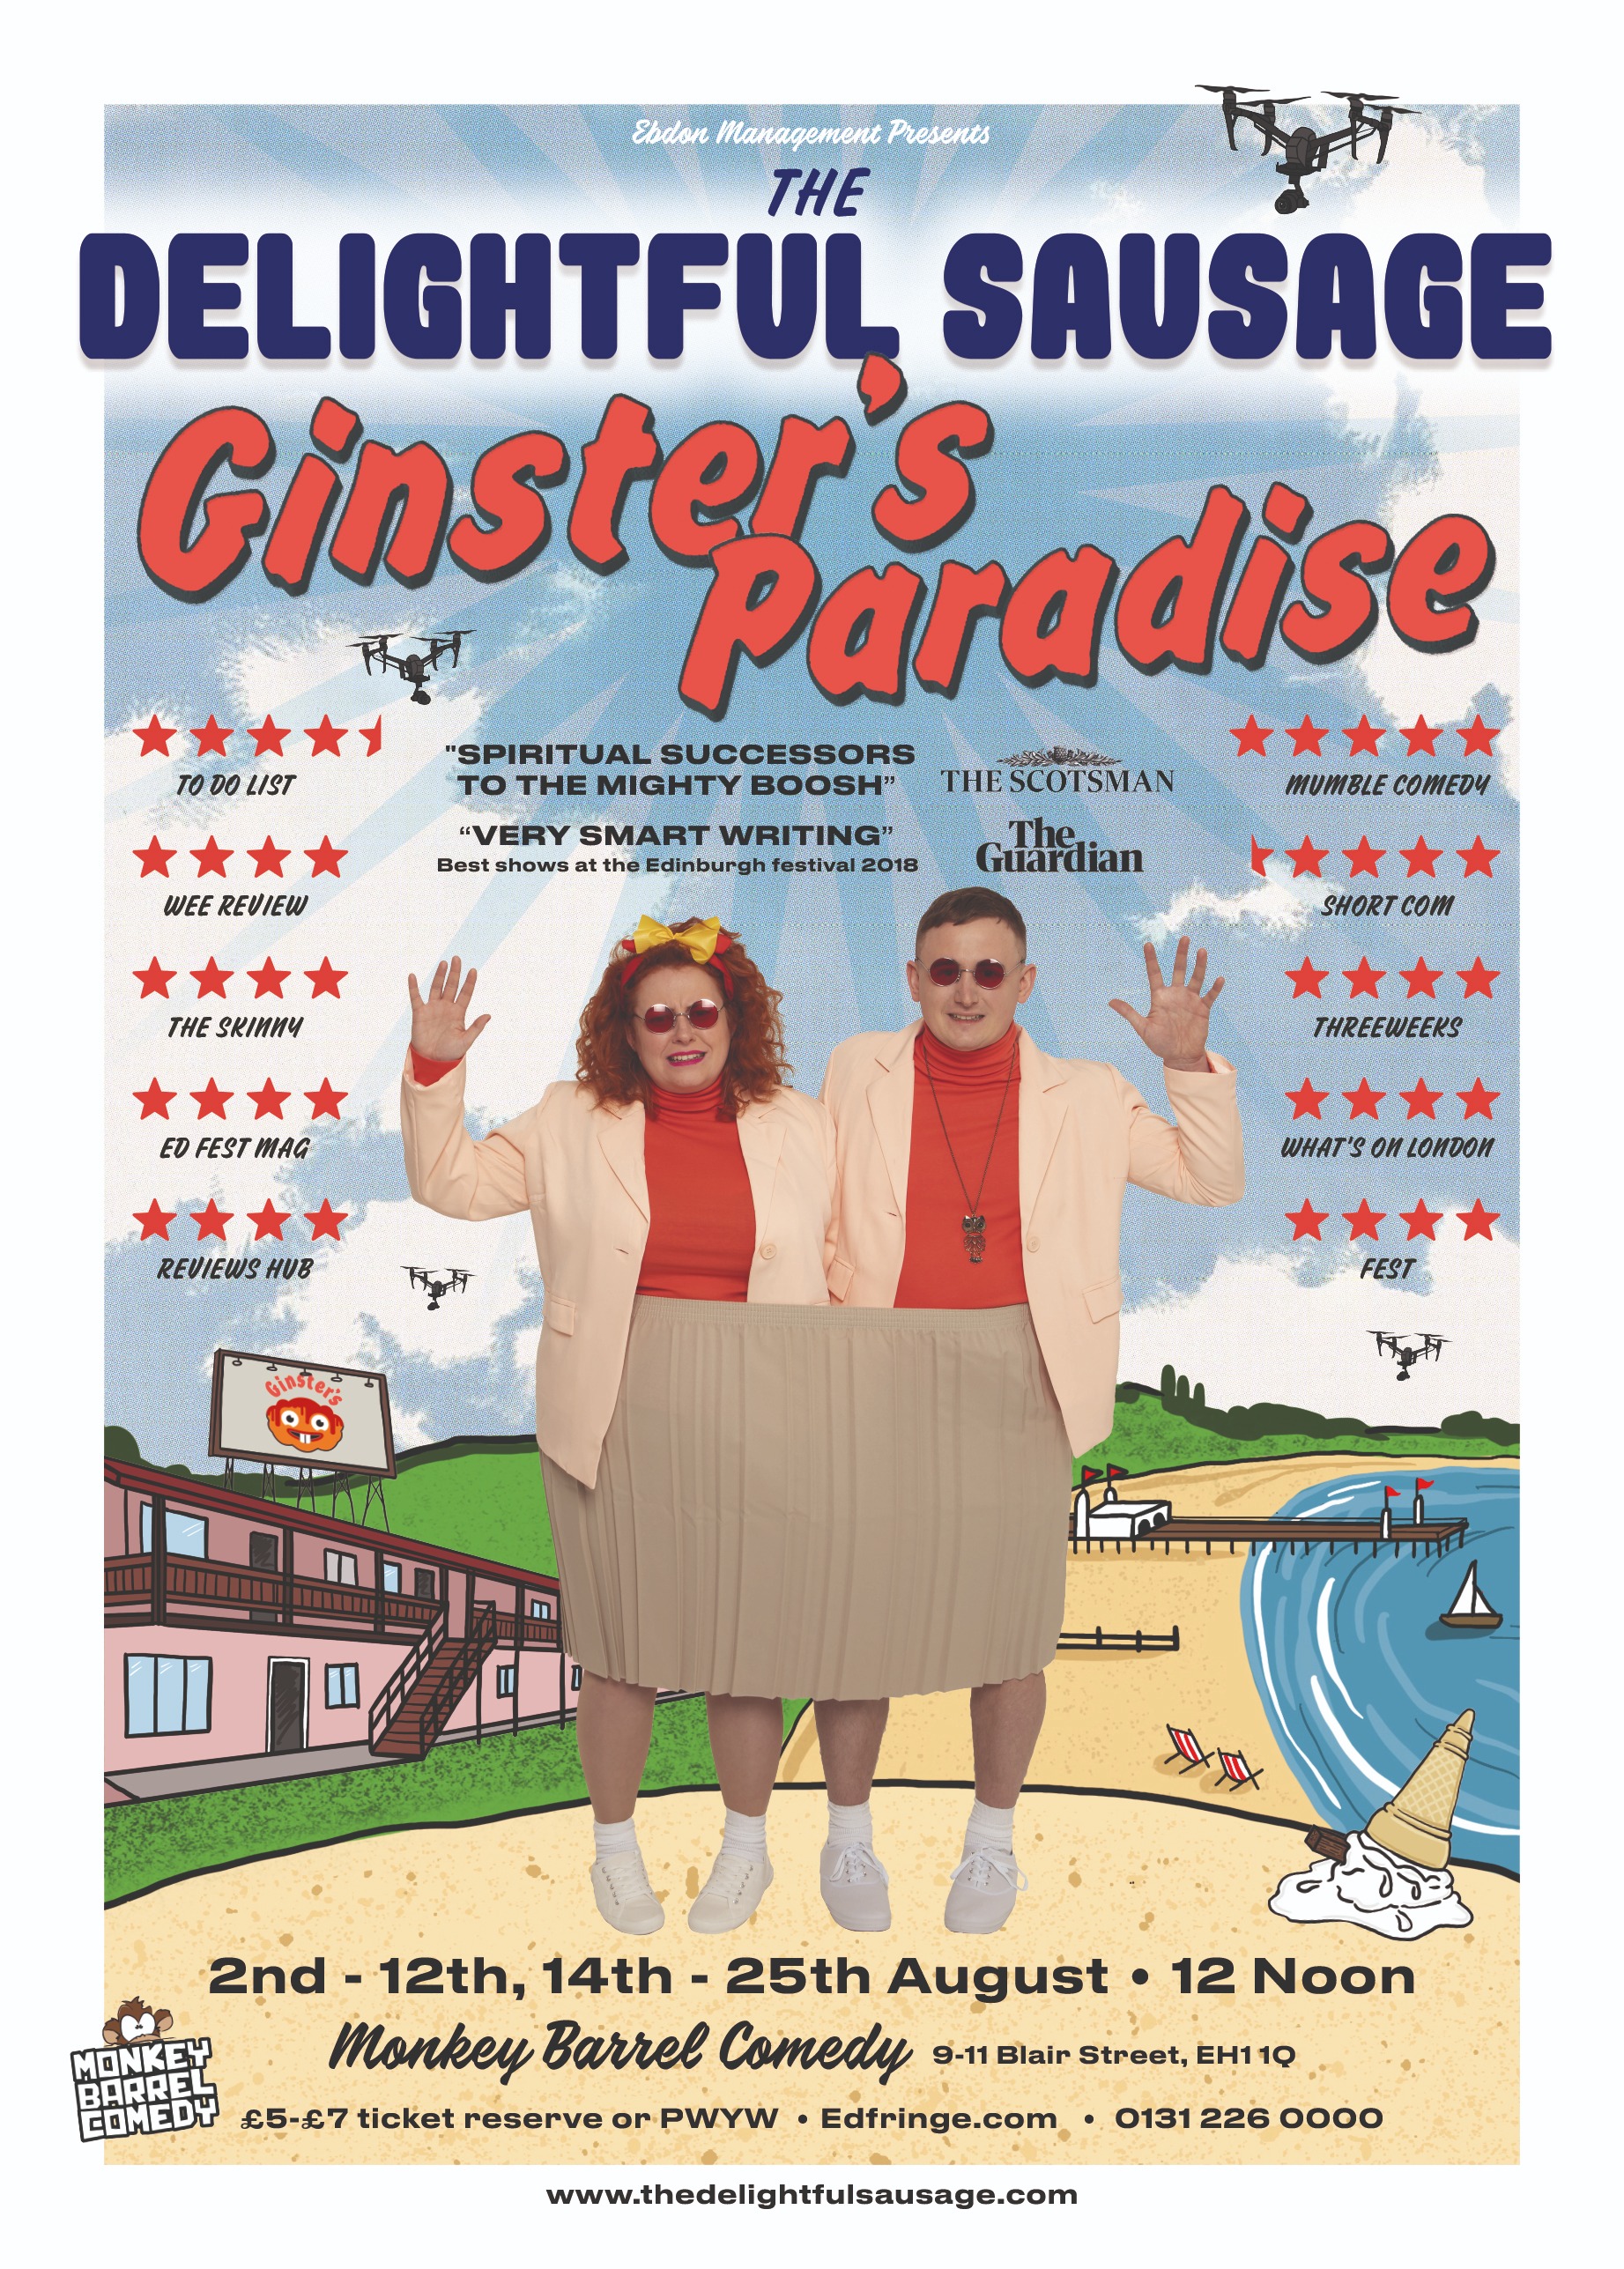 The poster for The Delightful Sausage: Ginster's Paradise